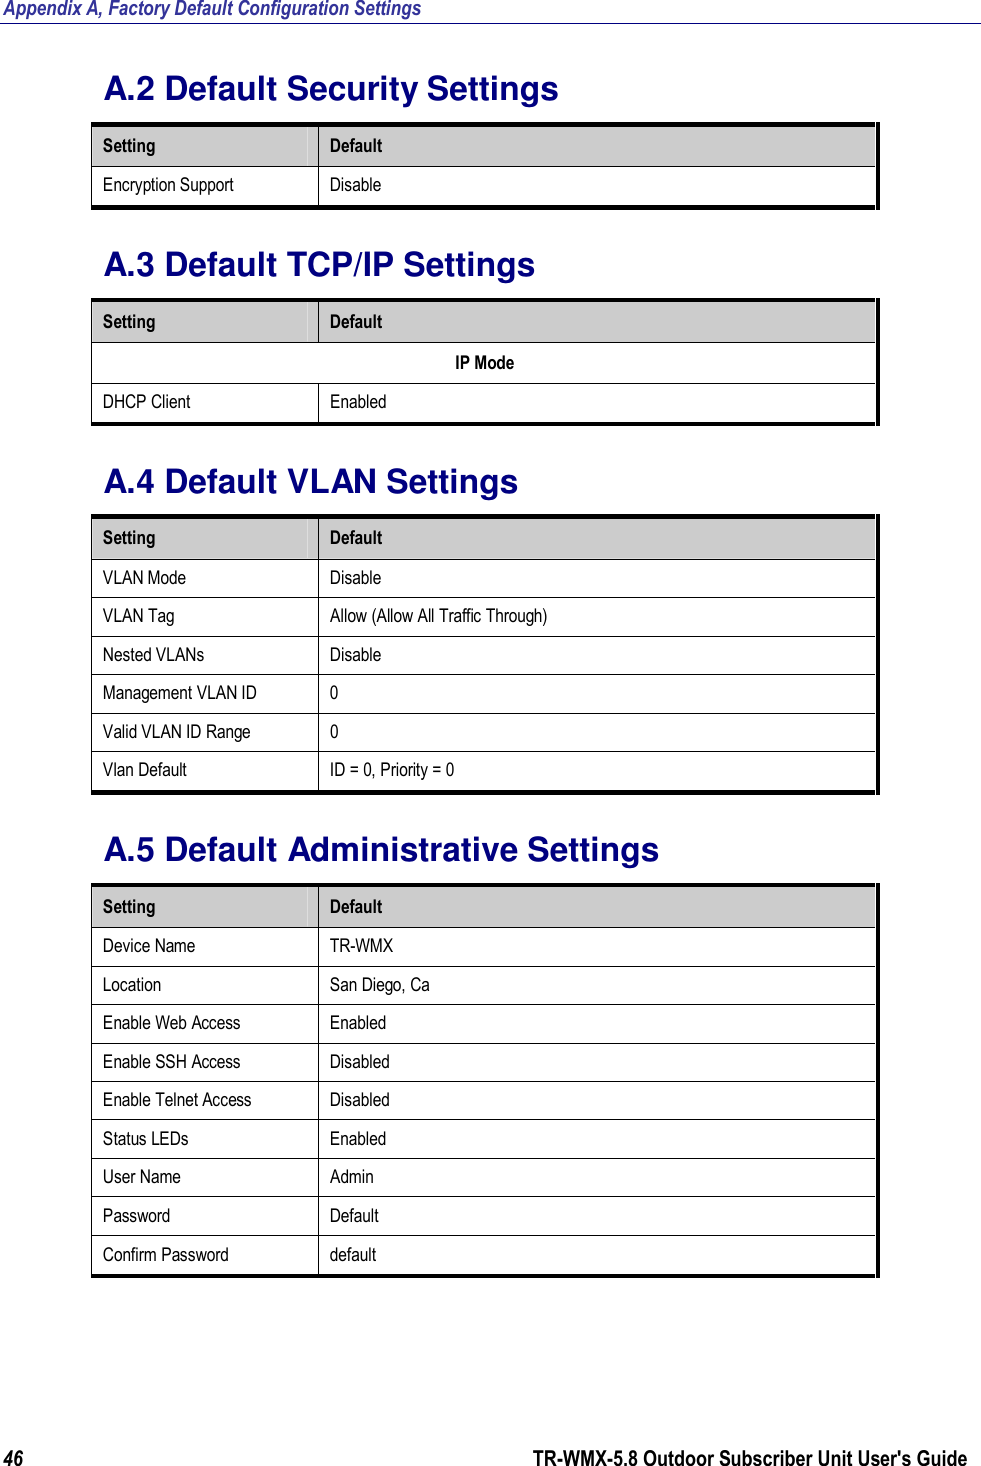 Appendix A, Factory Default Configuration Settings 46        TR-WMX-5.8 Outdoor Subscriber Unit User&apos;s Guide  A.2 Default Security Settings Setting  Default Encryption Support  Disable A.3 Default TCP/IP Settings Setting  Default IP Mode DHCP Client  Enabled A.4 Default VLAN Settings Setting  Default VLAN Mode  Disable VLAN Tag  Allow (Allow All Traffic Through) Nested VLANs  Disable Management VLAN ID  0 Valid VLAN ID Range  0 Vlan Default  ID = 0, Priority = 0 A.5 Default Administrative Settings Setting  Default Device Name  TR-WMX Location  San Diego, Ca Enable Web Access  Enabled Enable SSH Access  Disabled Enable Telnet Access  Disabled Status LEDs  Enabled User Name  Admin Password  Default Confirm Password  default 